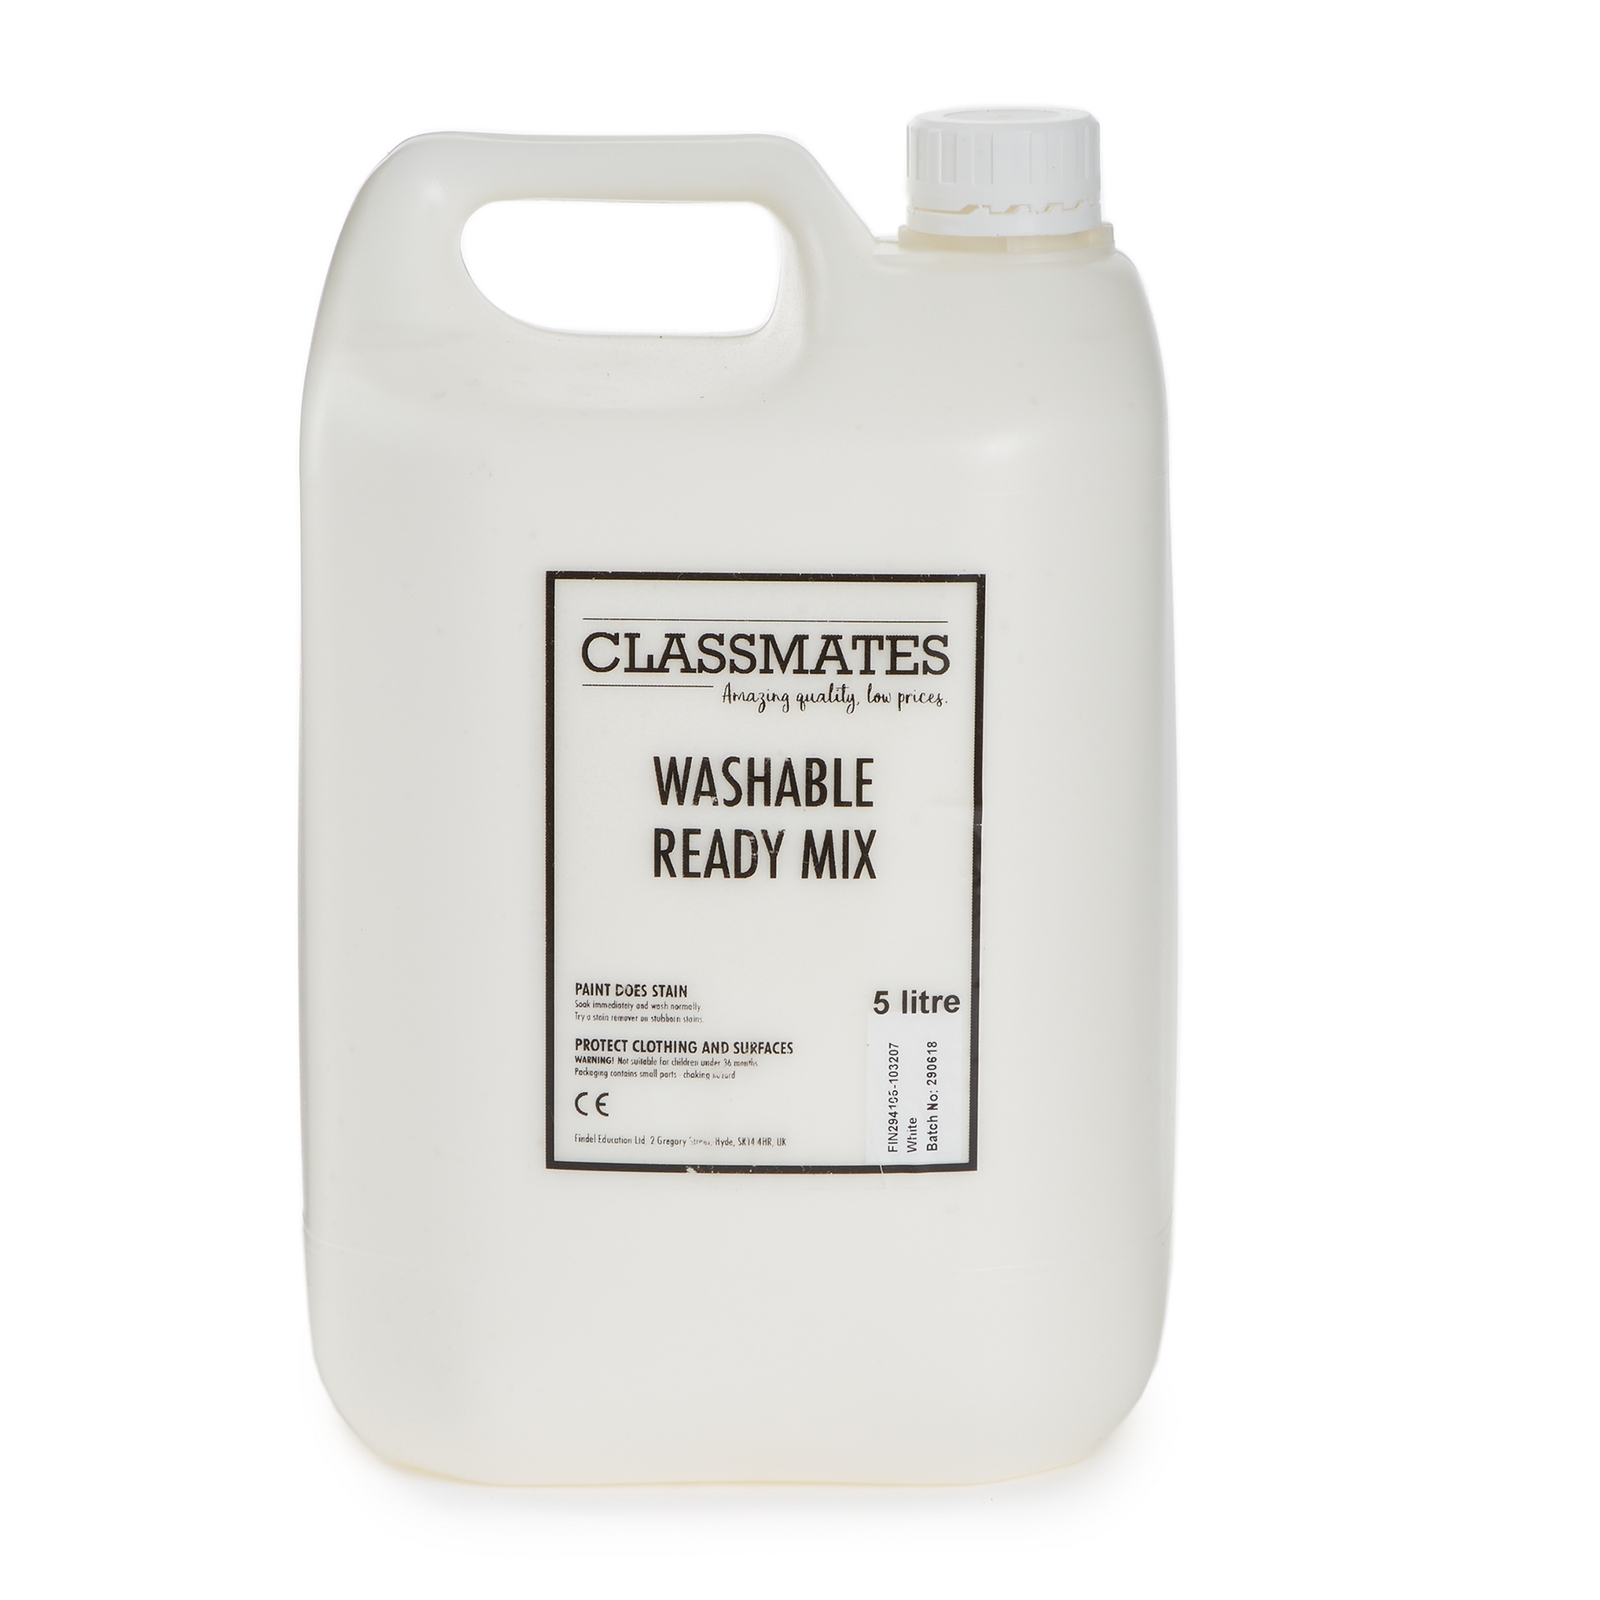 Classmates Washable White Ready Mixed Paint in White - 5 Litre - Each